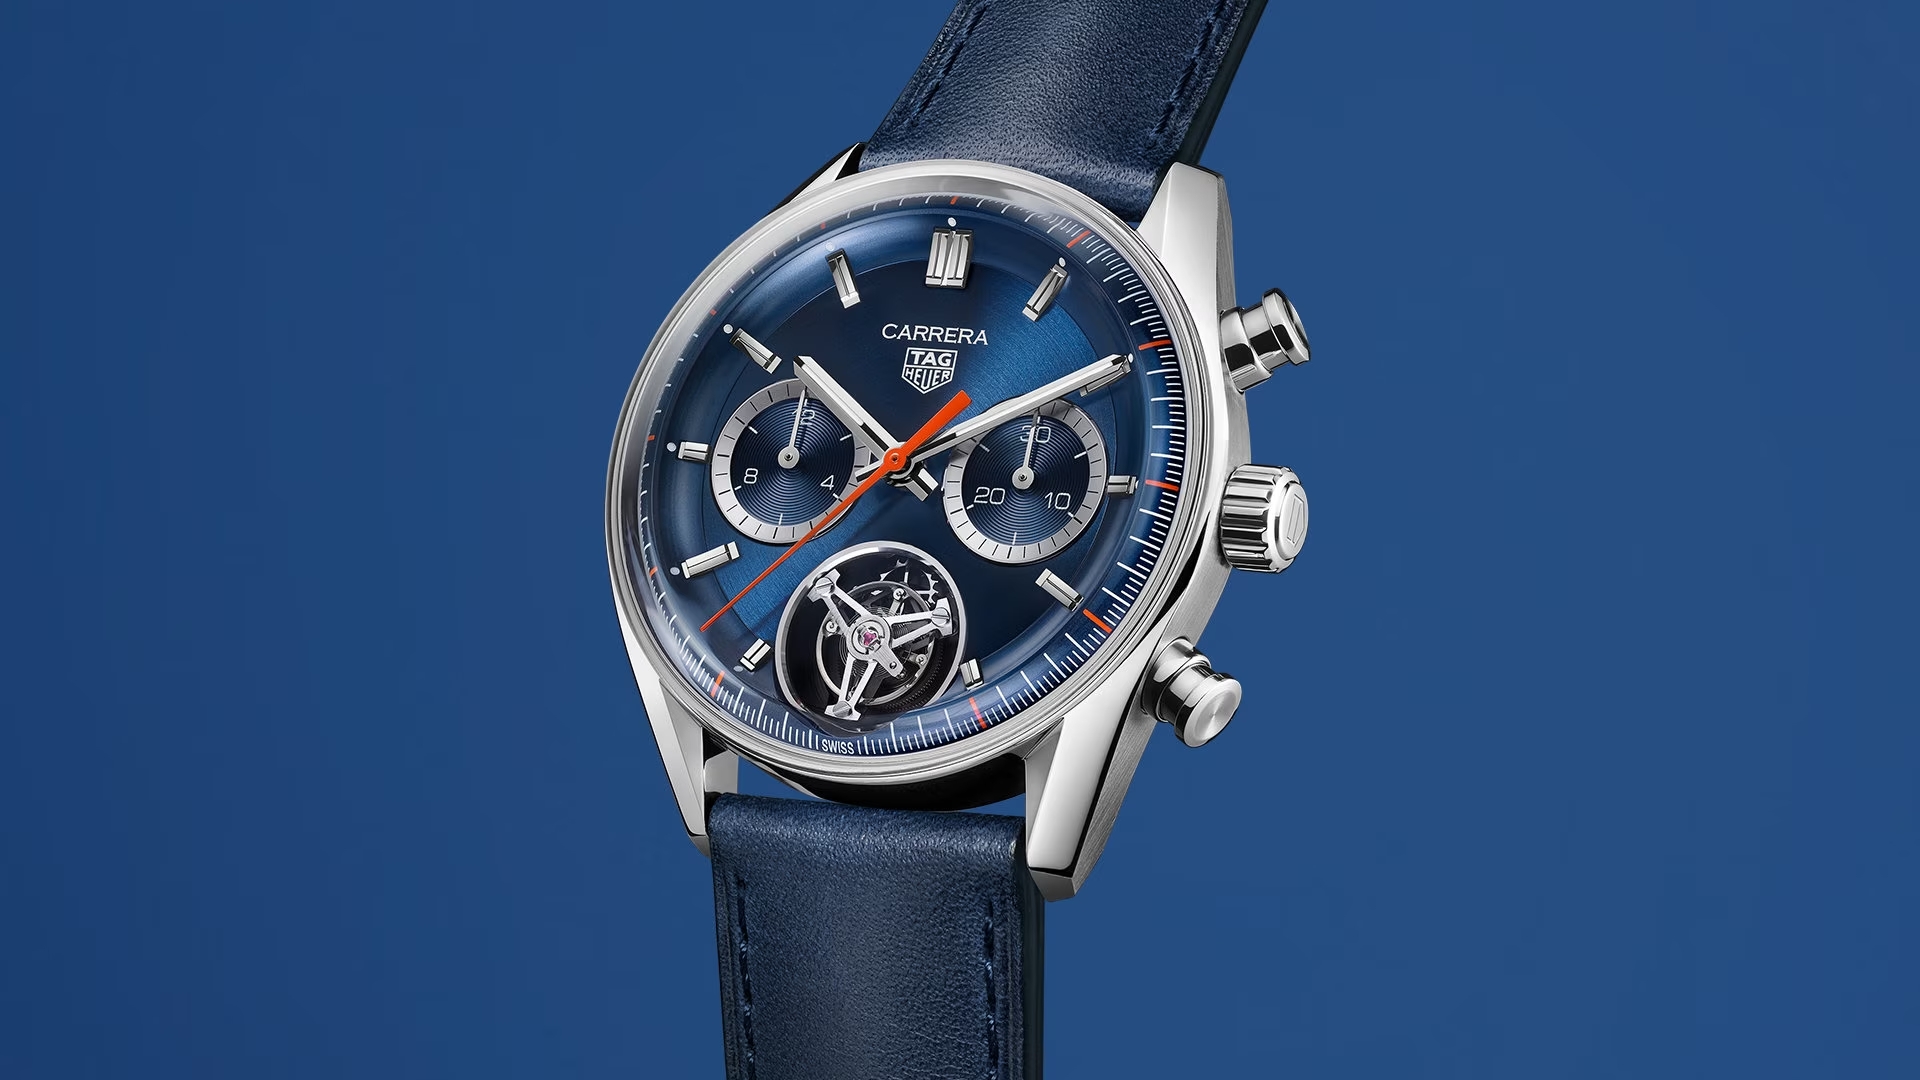 Introducing The New TAG Heuer Carrera Chronograph 39mm “Glassbox